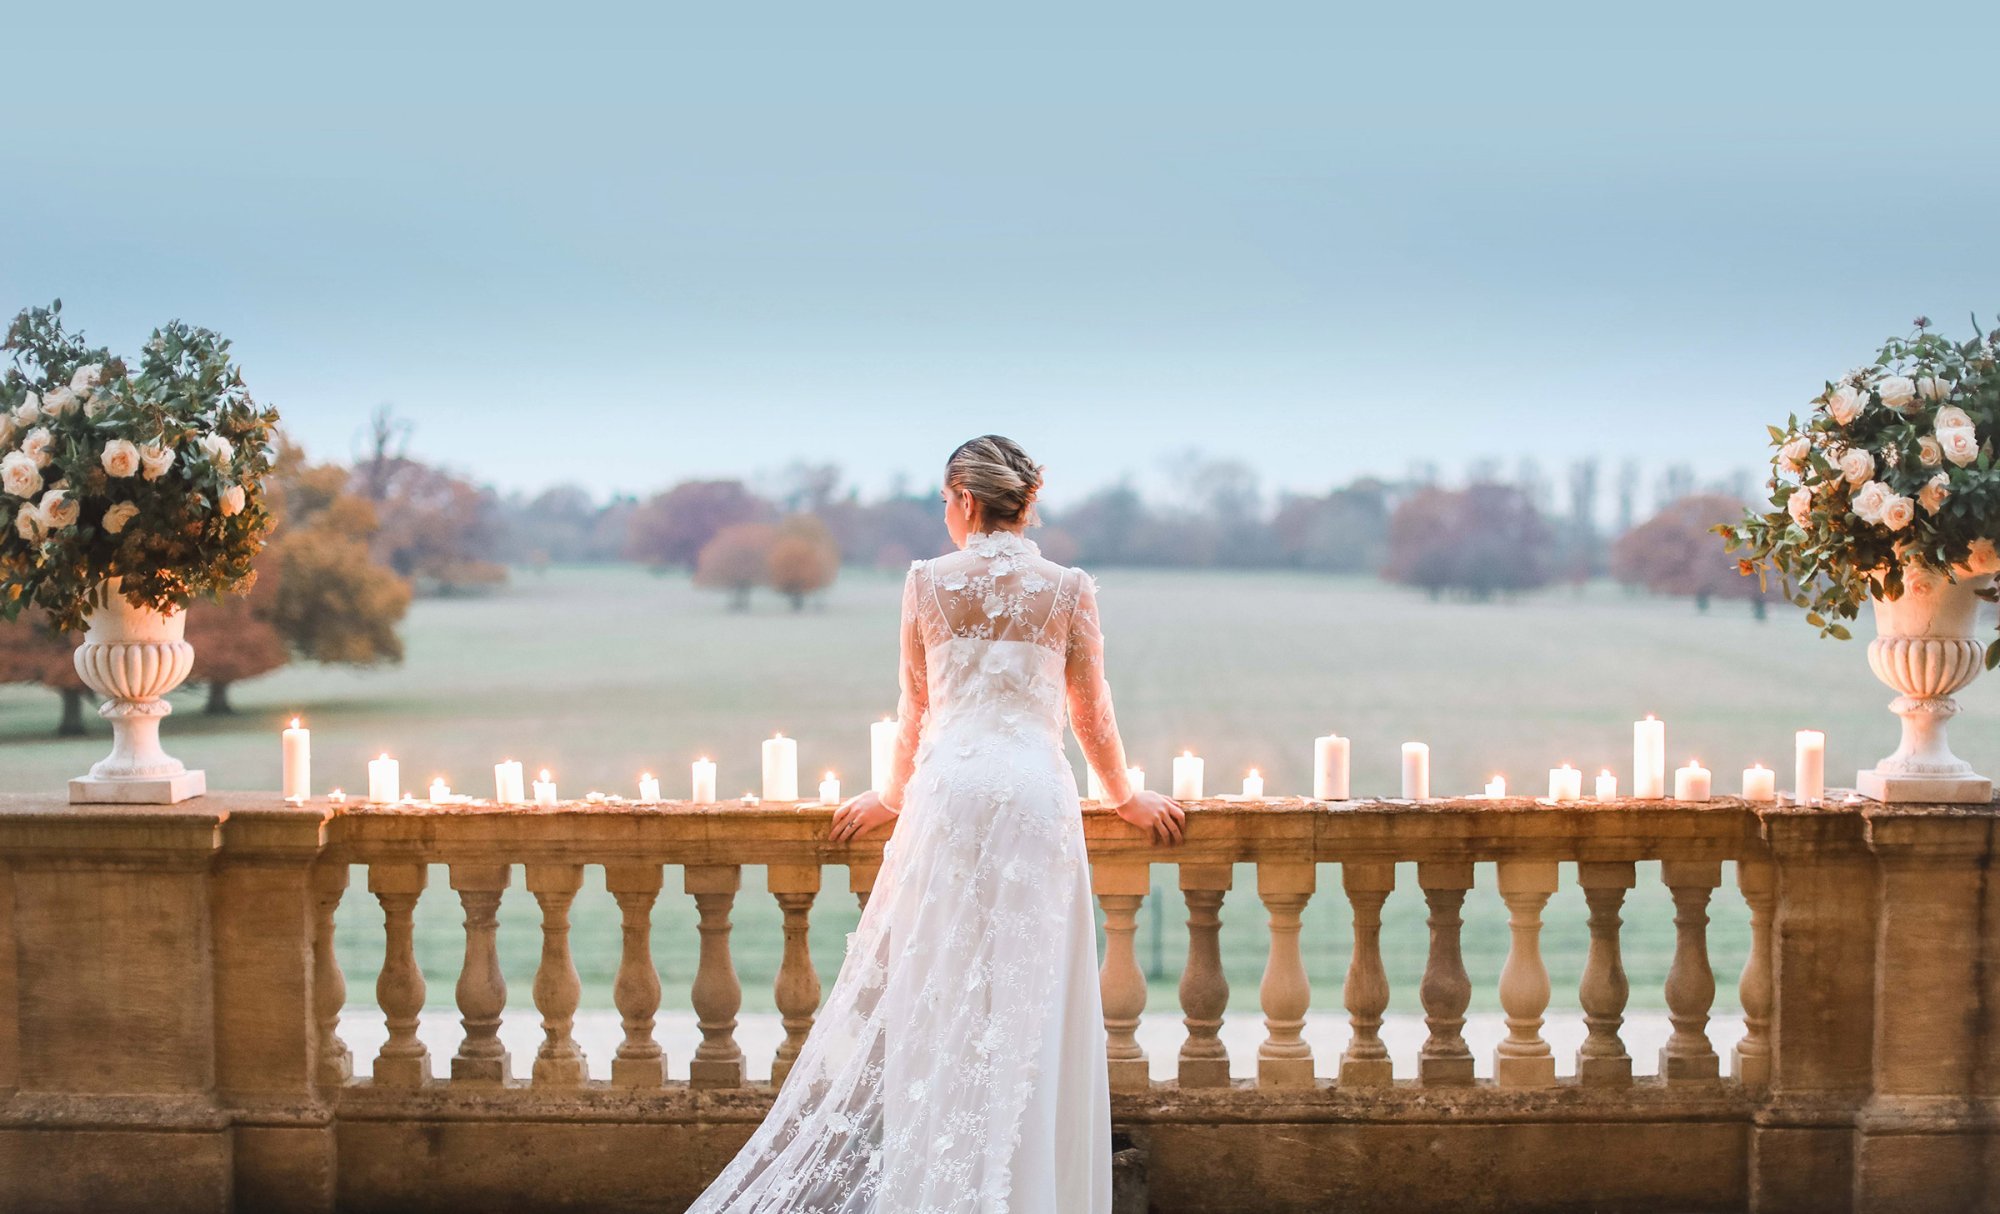 A wedding bride looking over a countryside view from a balcony at Kirtlington Park in Oxfordshire